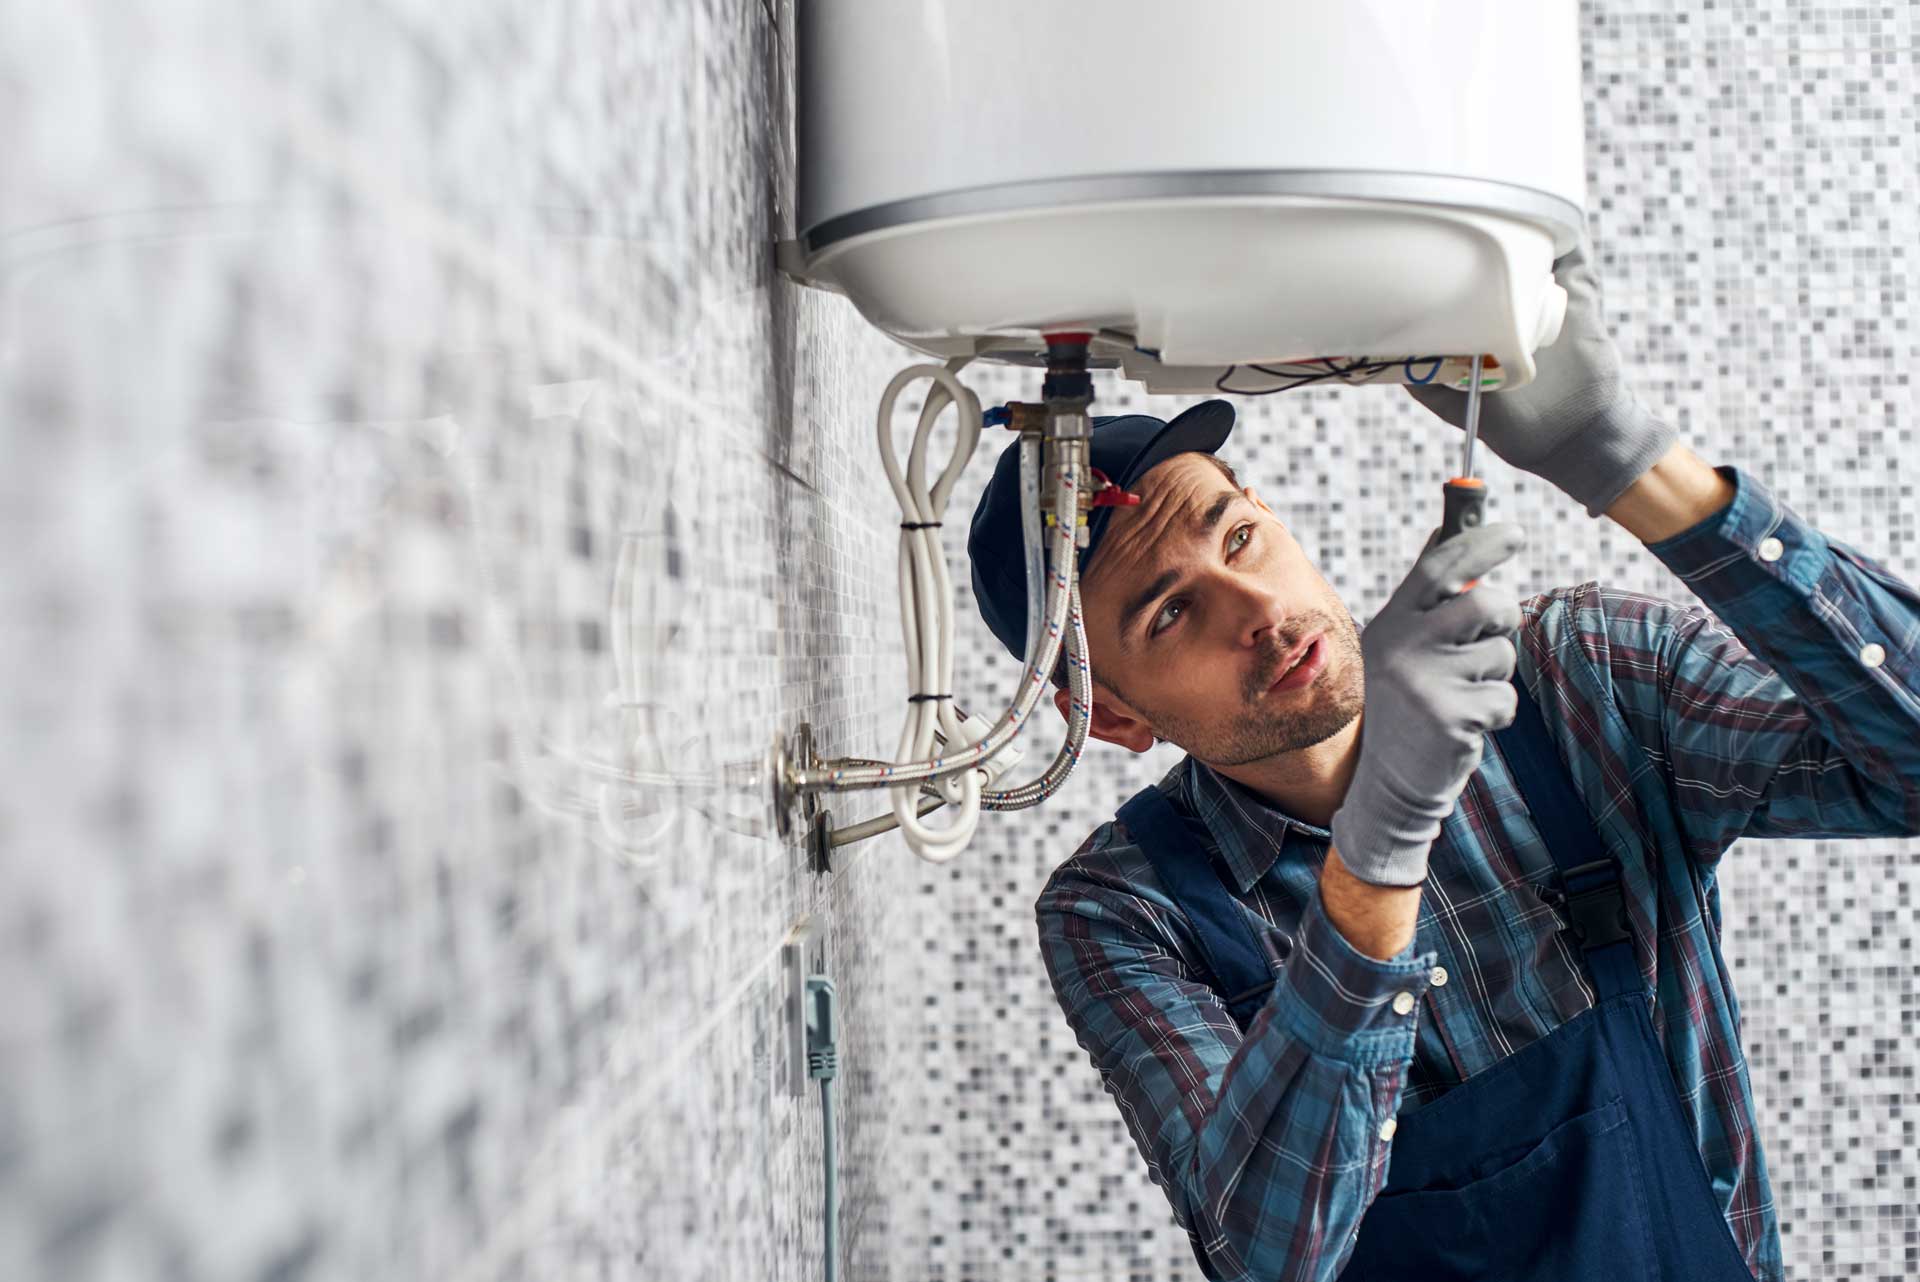 HOW TO TROUBLESHOOT WATER PRESSURE LOSS IN YOUR BATHROOM